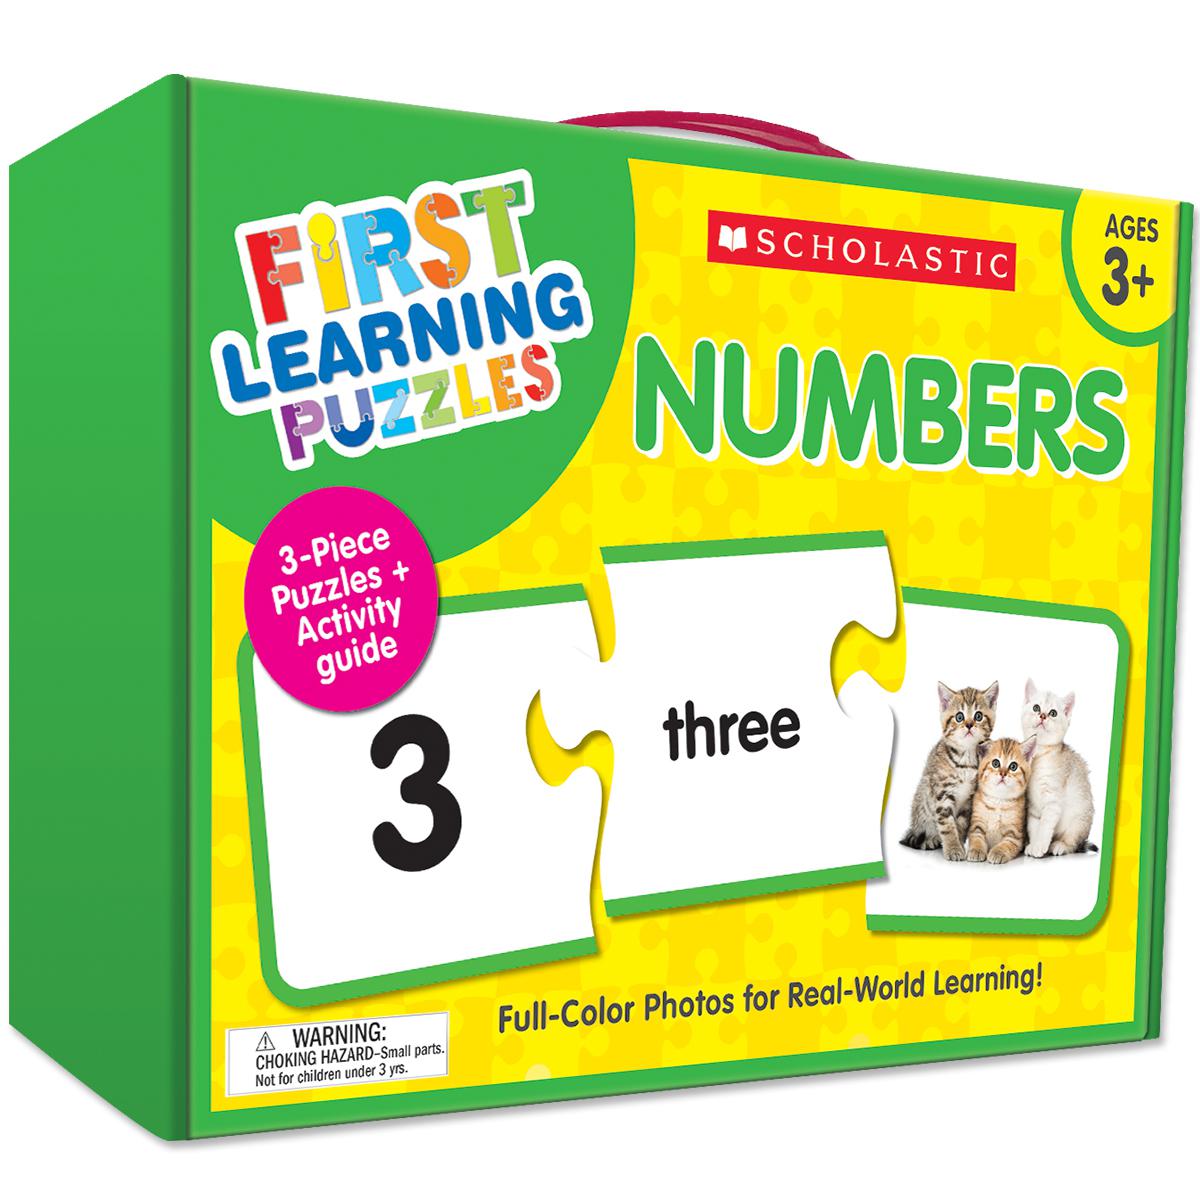  First Learning Puzzles: Numbers 